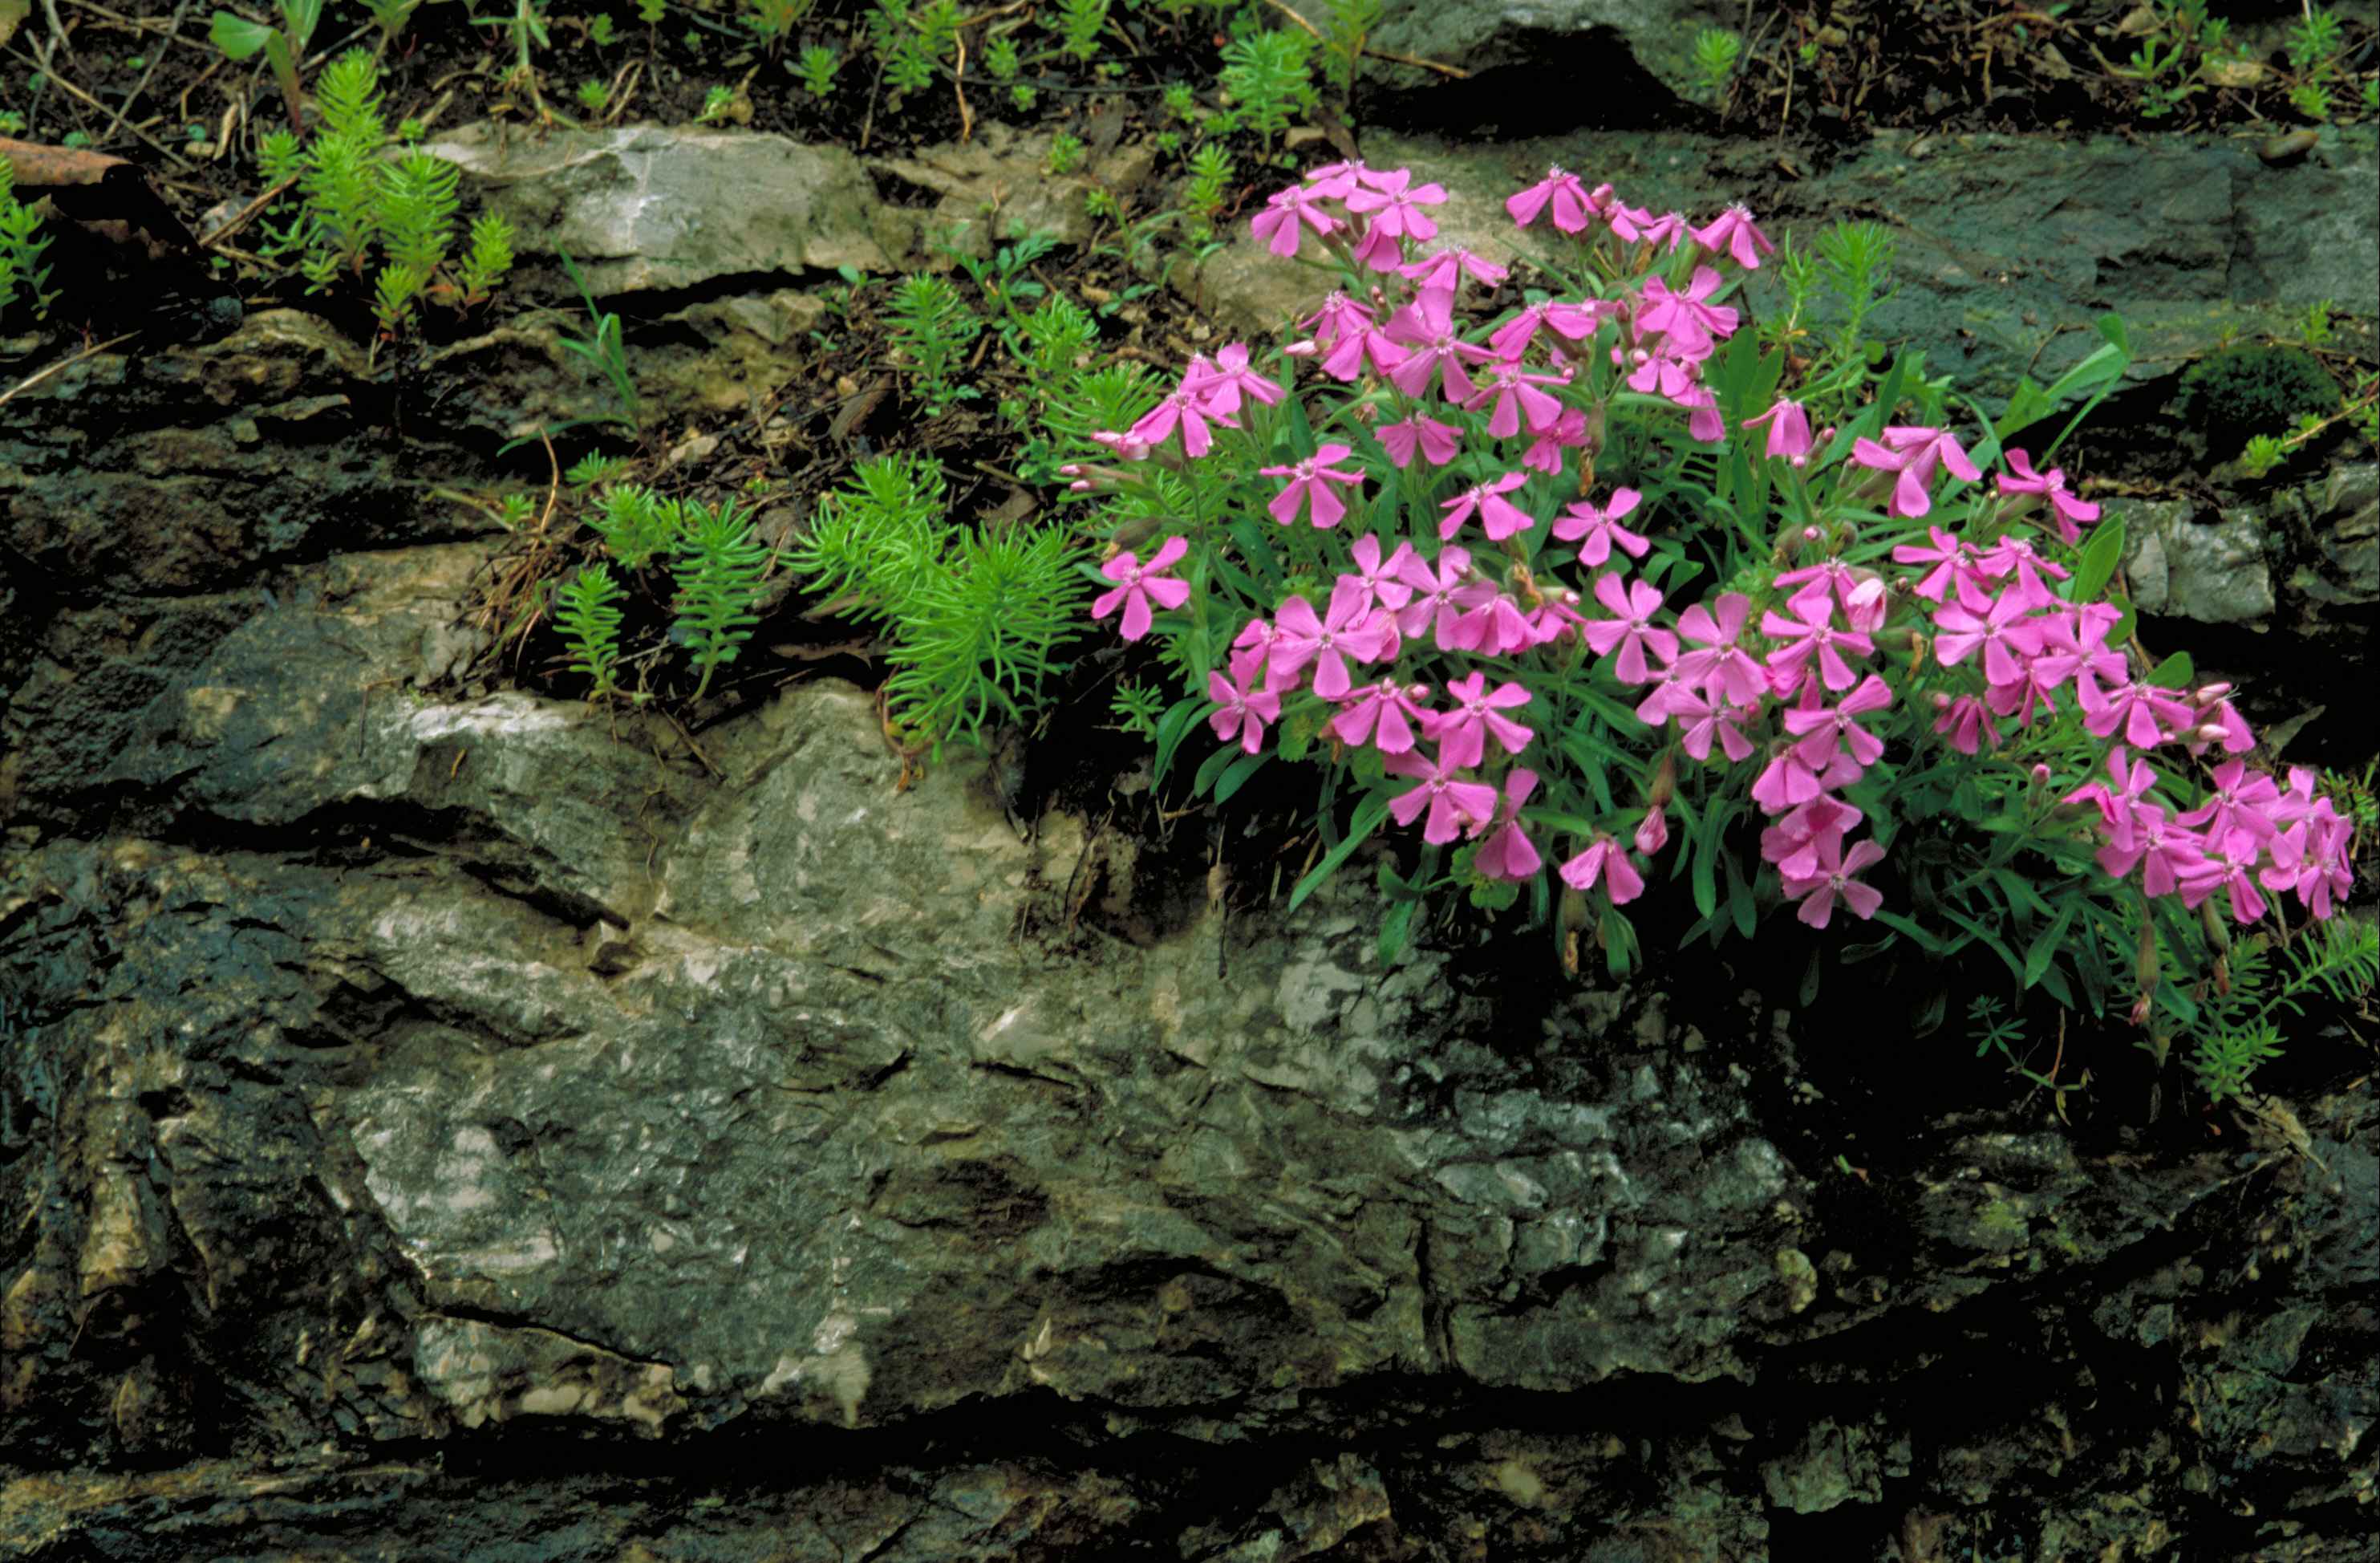 File:Carolina wild pink flower blossoms in rocks and moss.jpg ...